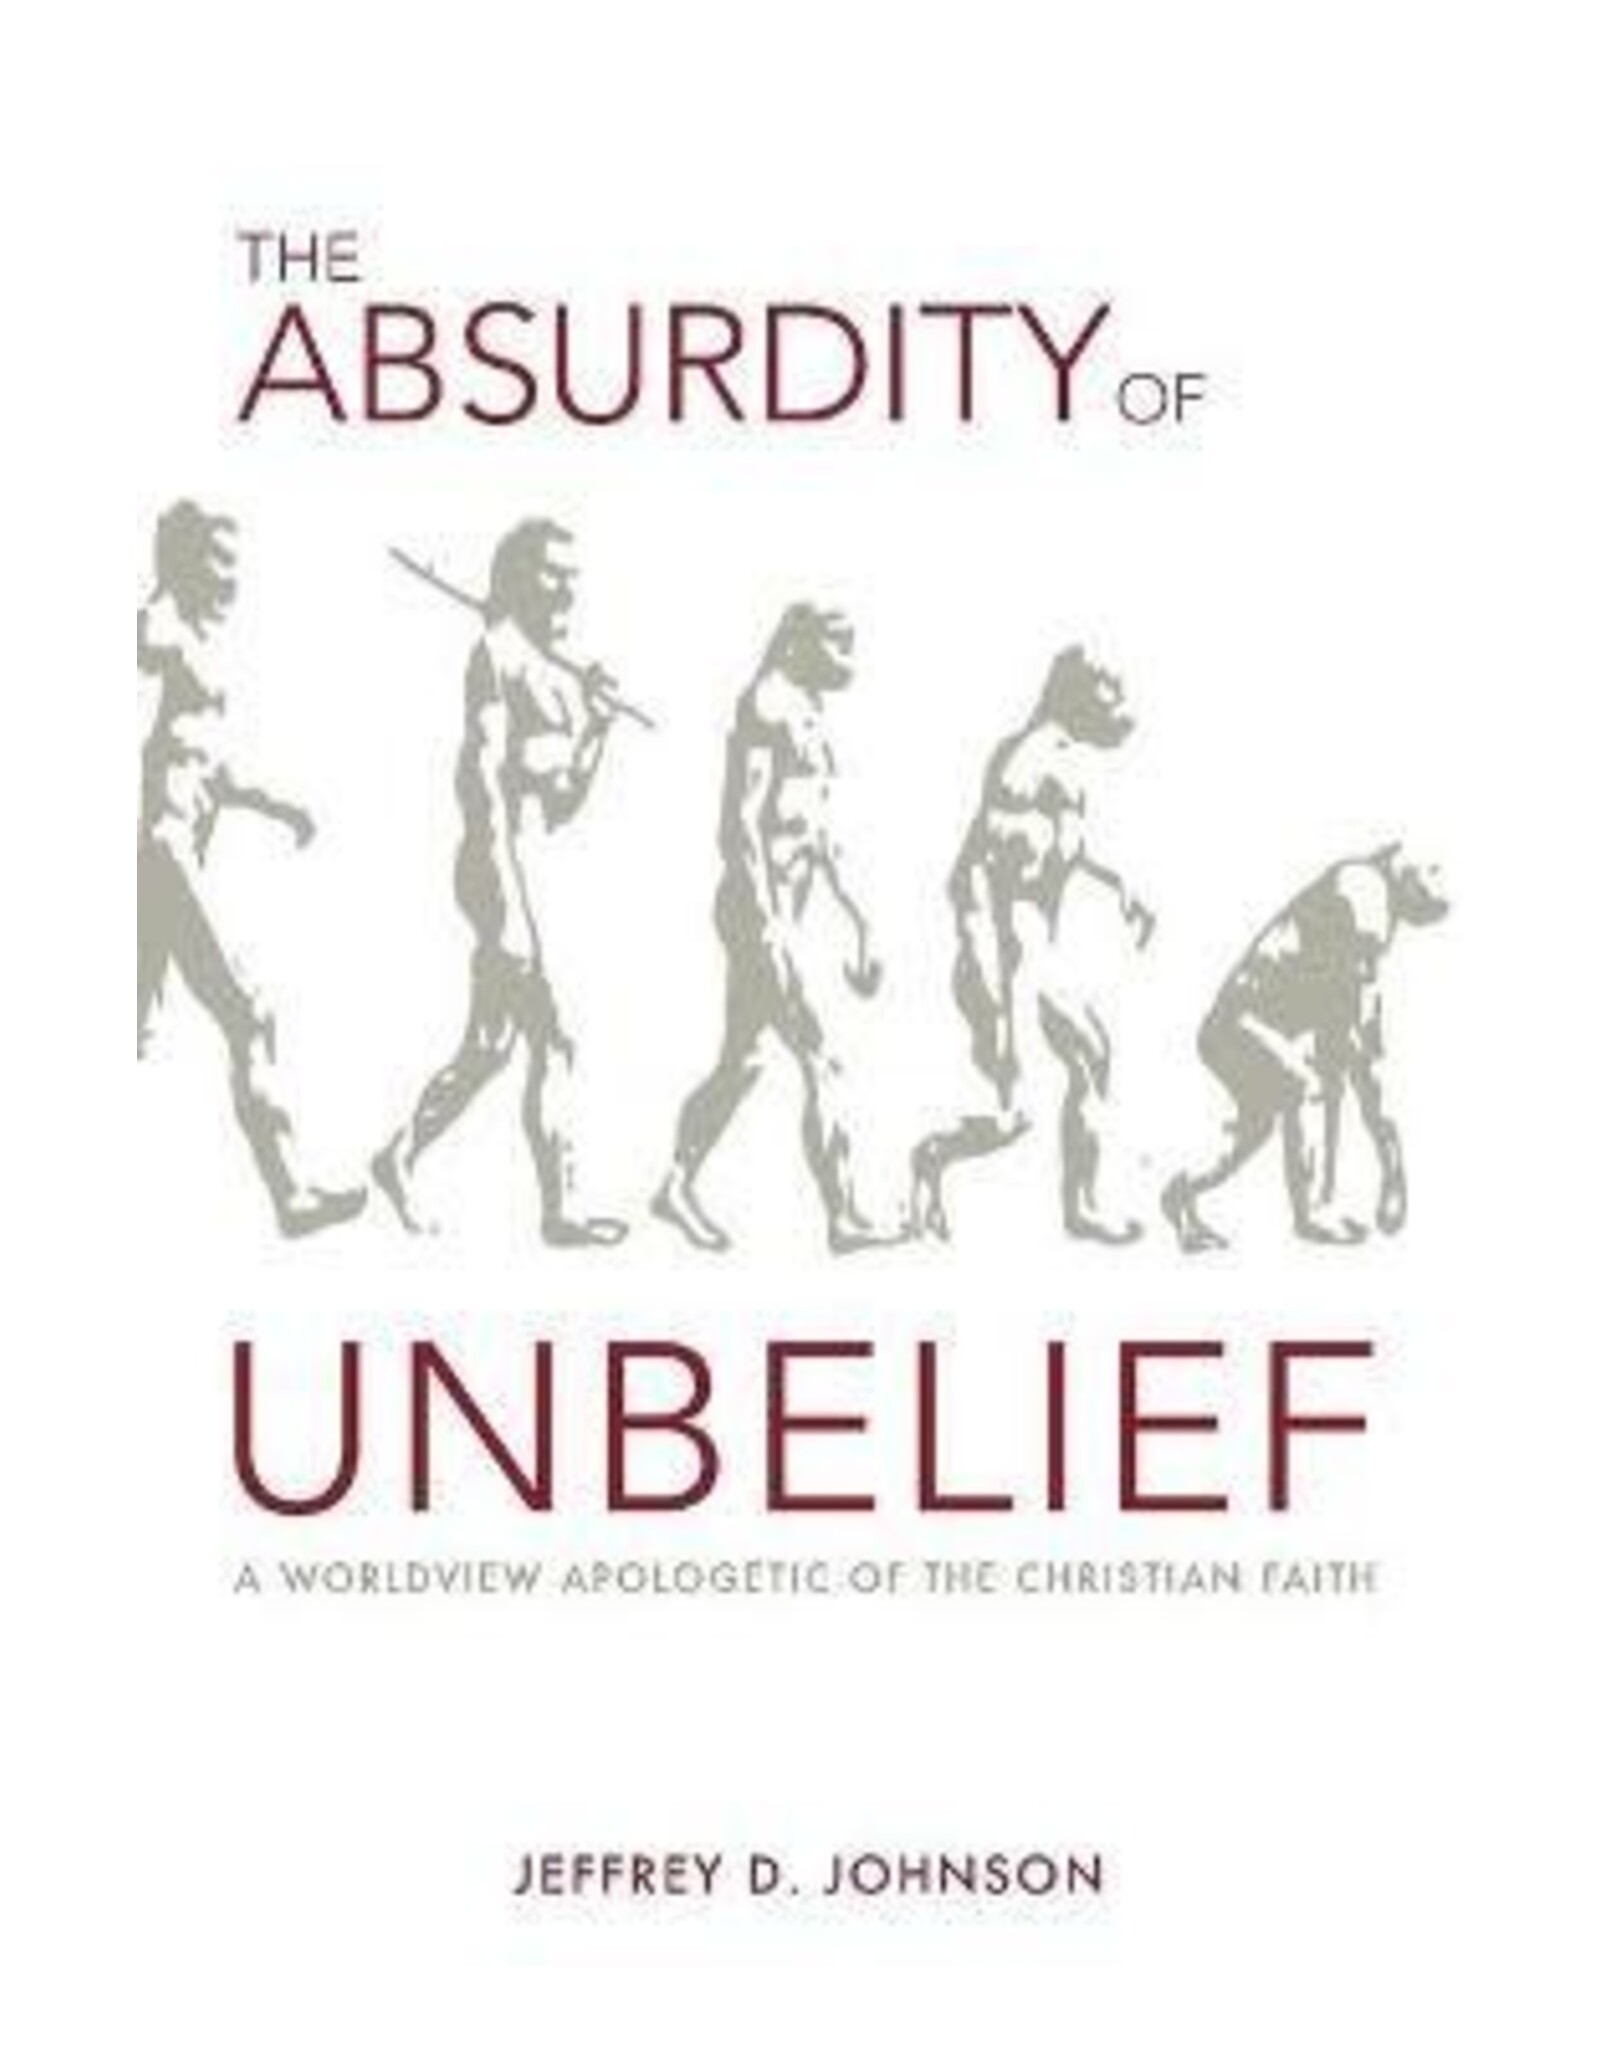 Jeffrey D. Johnston The Absurdity of Unbelief: A Worldview Apologetic of the Christian